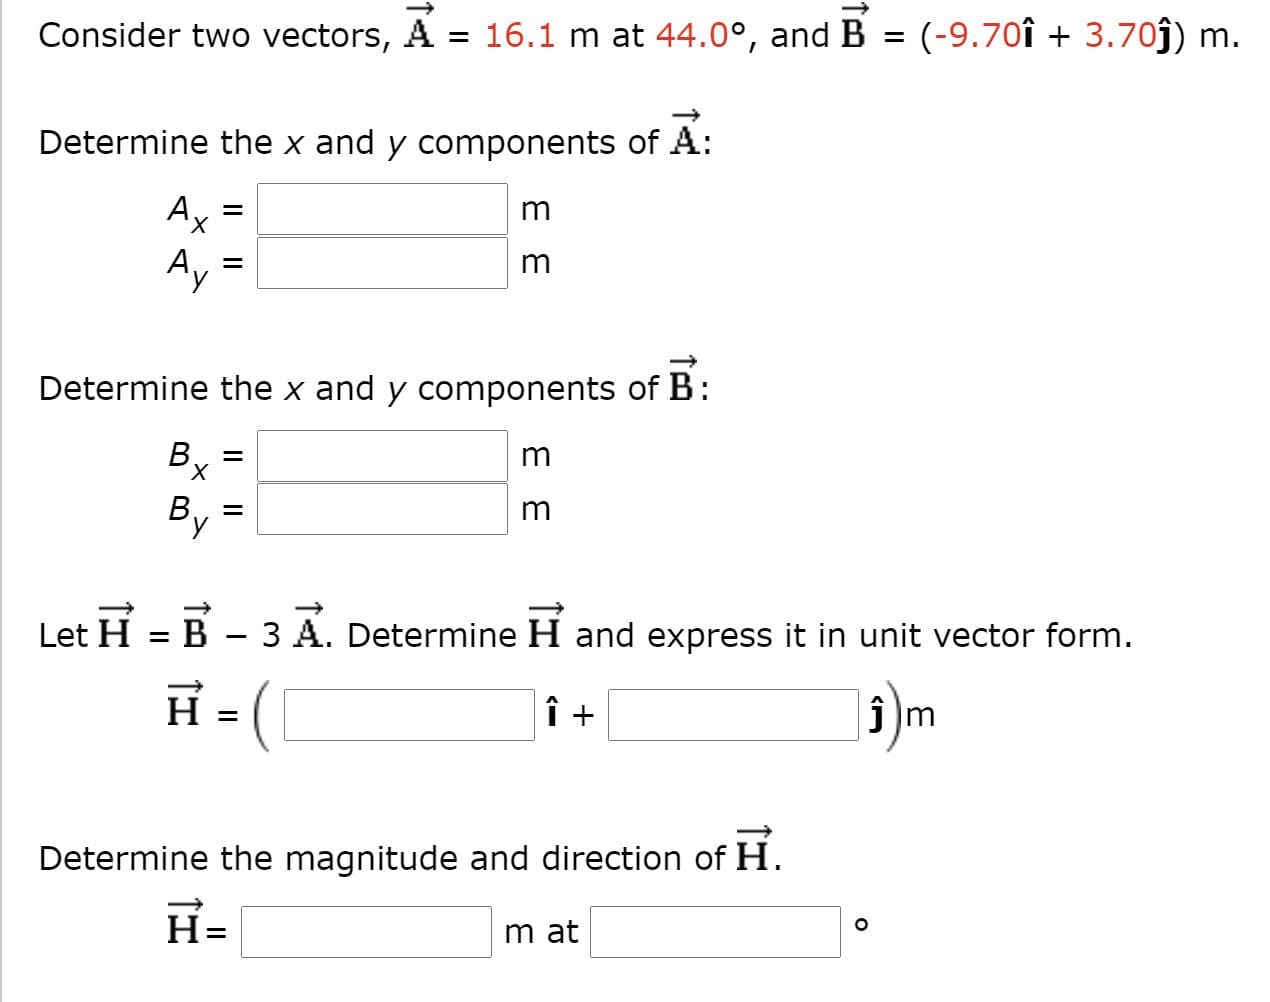 Consider two vectors, A
= 16.1 m at 44.0°, and B = (-9.70î + 3.70ĵ)
Determine the x and y components of A:
Ax =
m
Ay
m
Determine the x and y components of B:
B.
X.
m
m
H
B
3
А.
Determine H and express it in unit vector form.
Let
|5)m
H =
î +
Determine the magnitude and direction of
H.
H=
m at
E E
II
